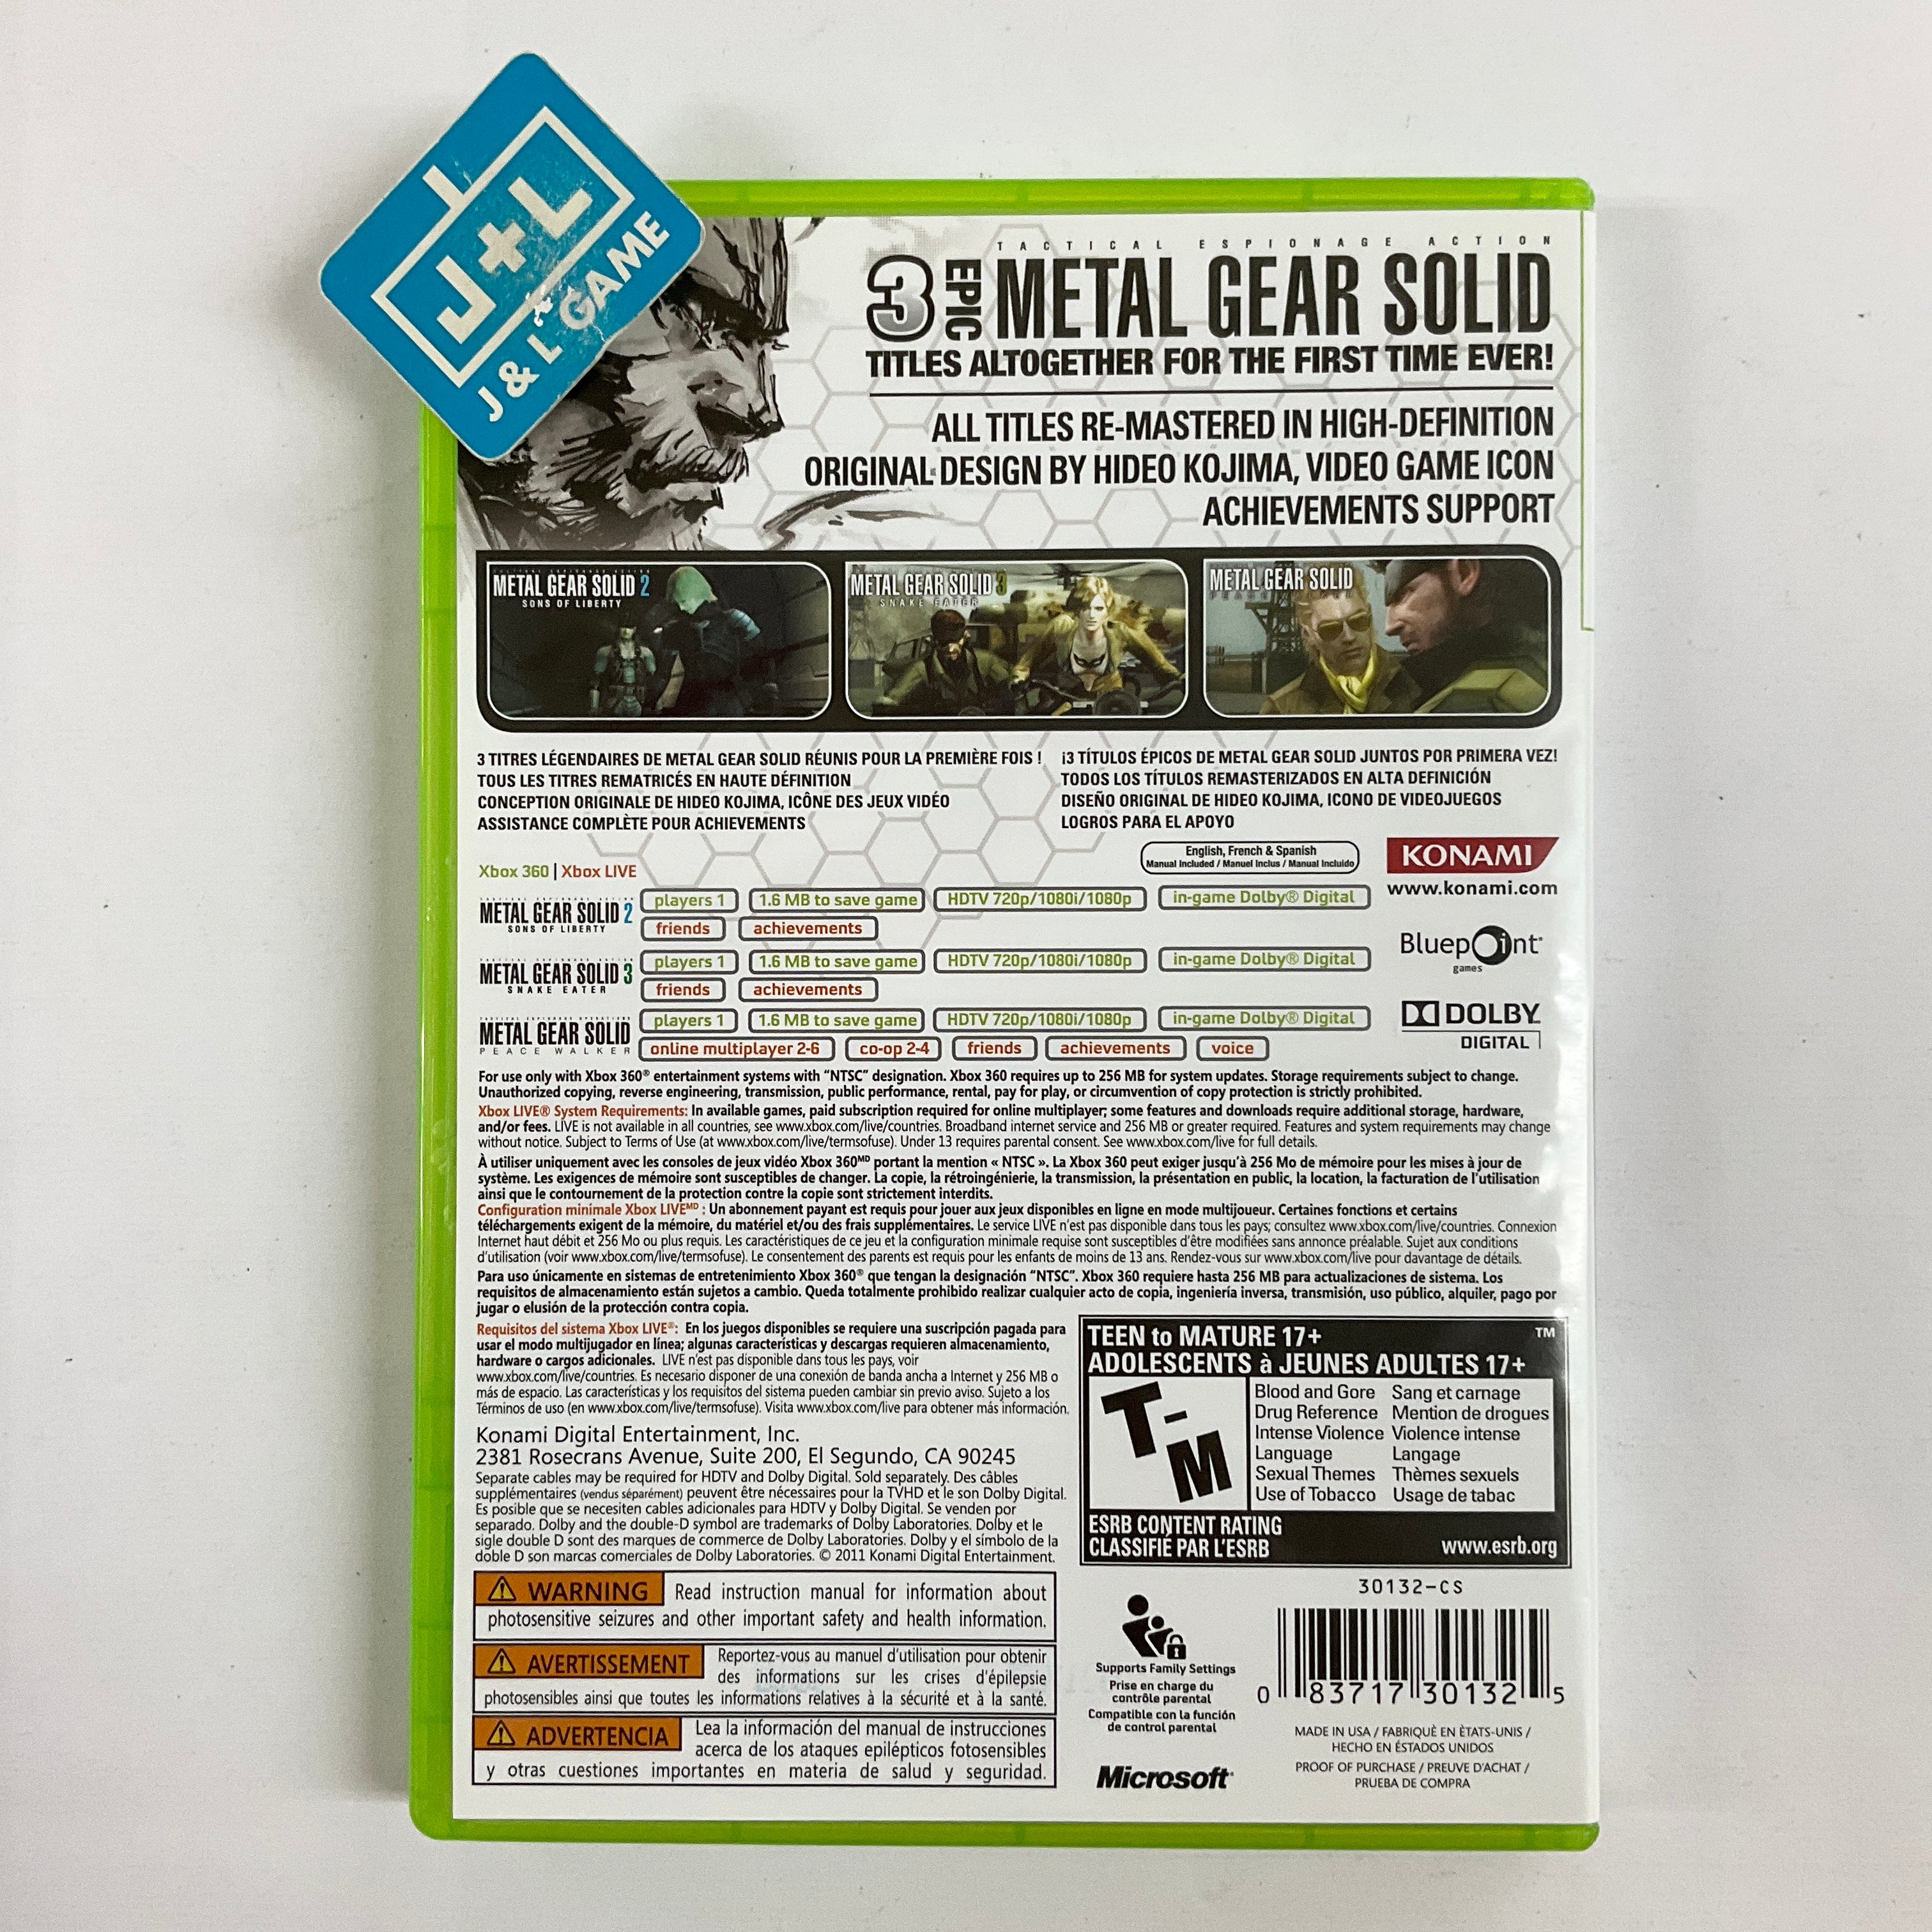 Metal Gear Solid HD Collection - Xbox 360 [Pre-Owned] Video Games Konami   